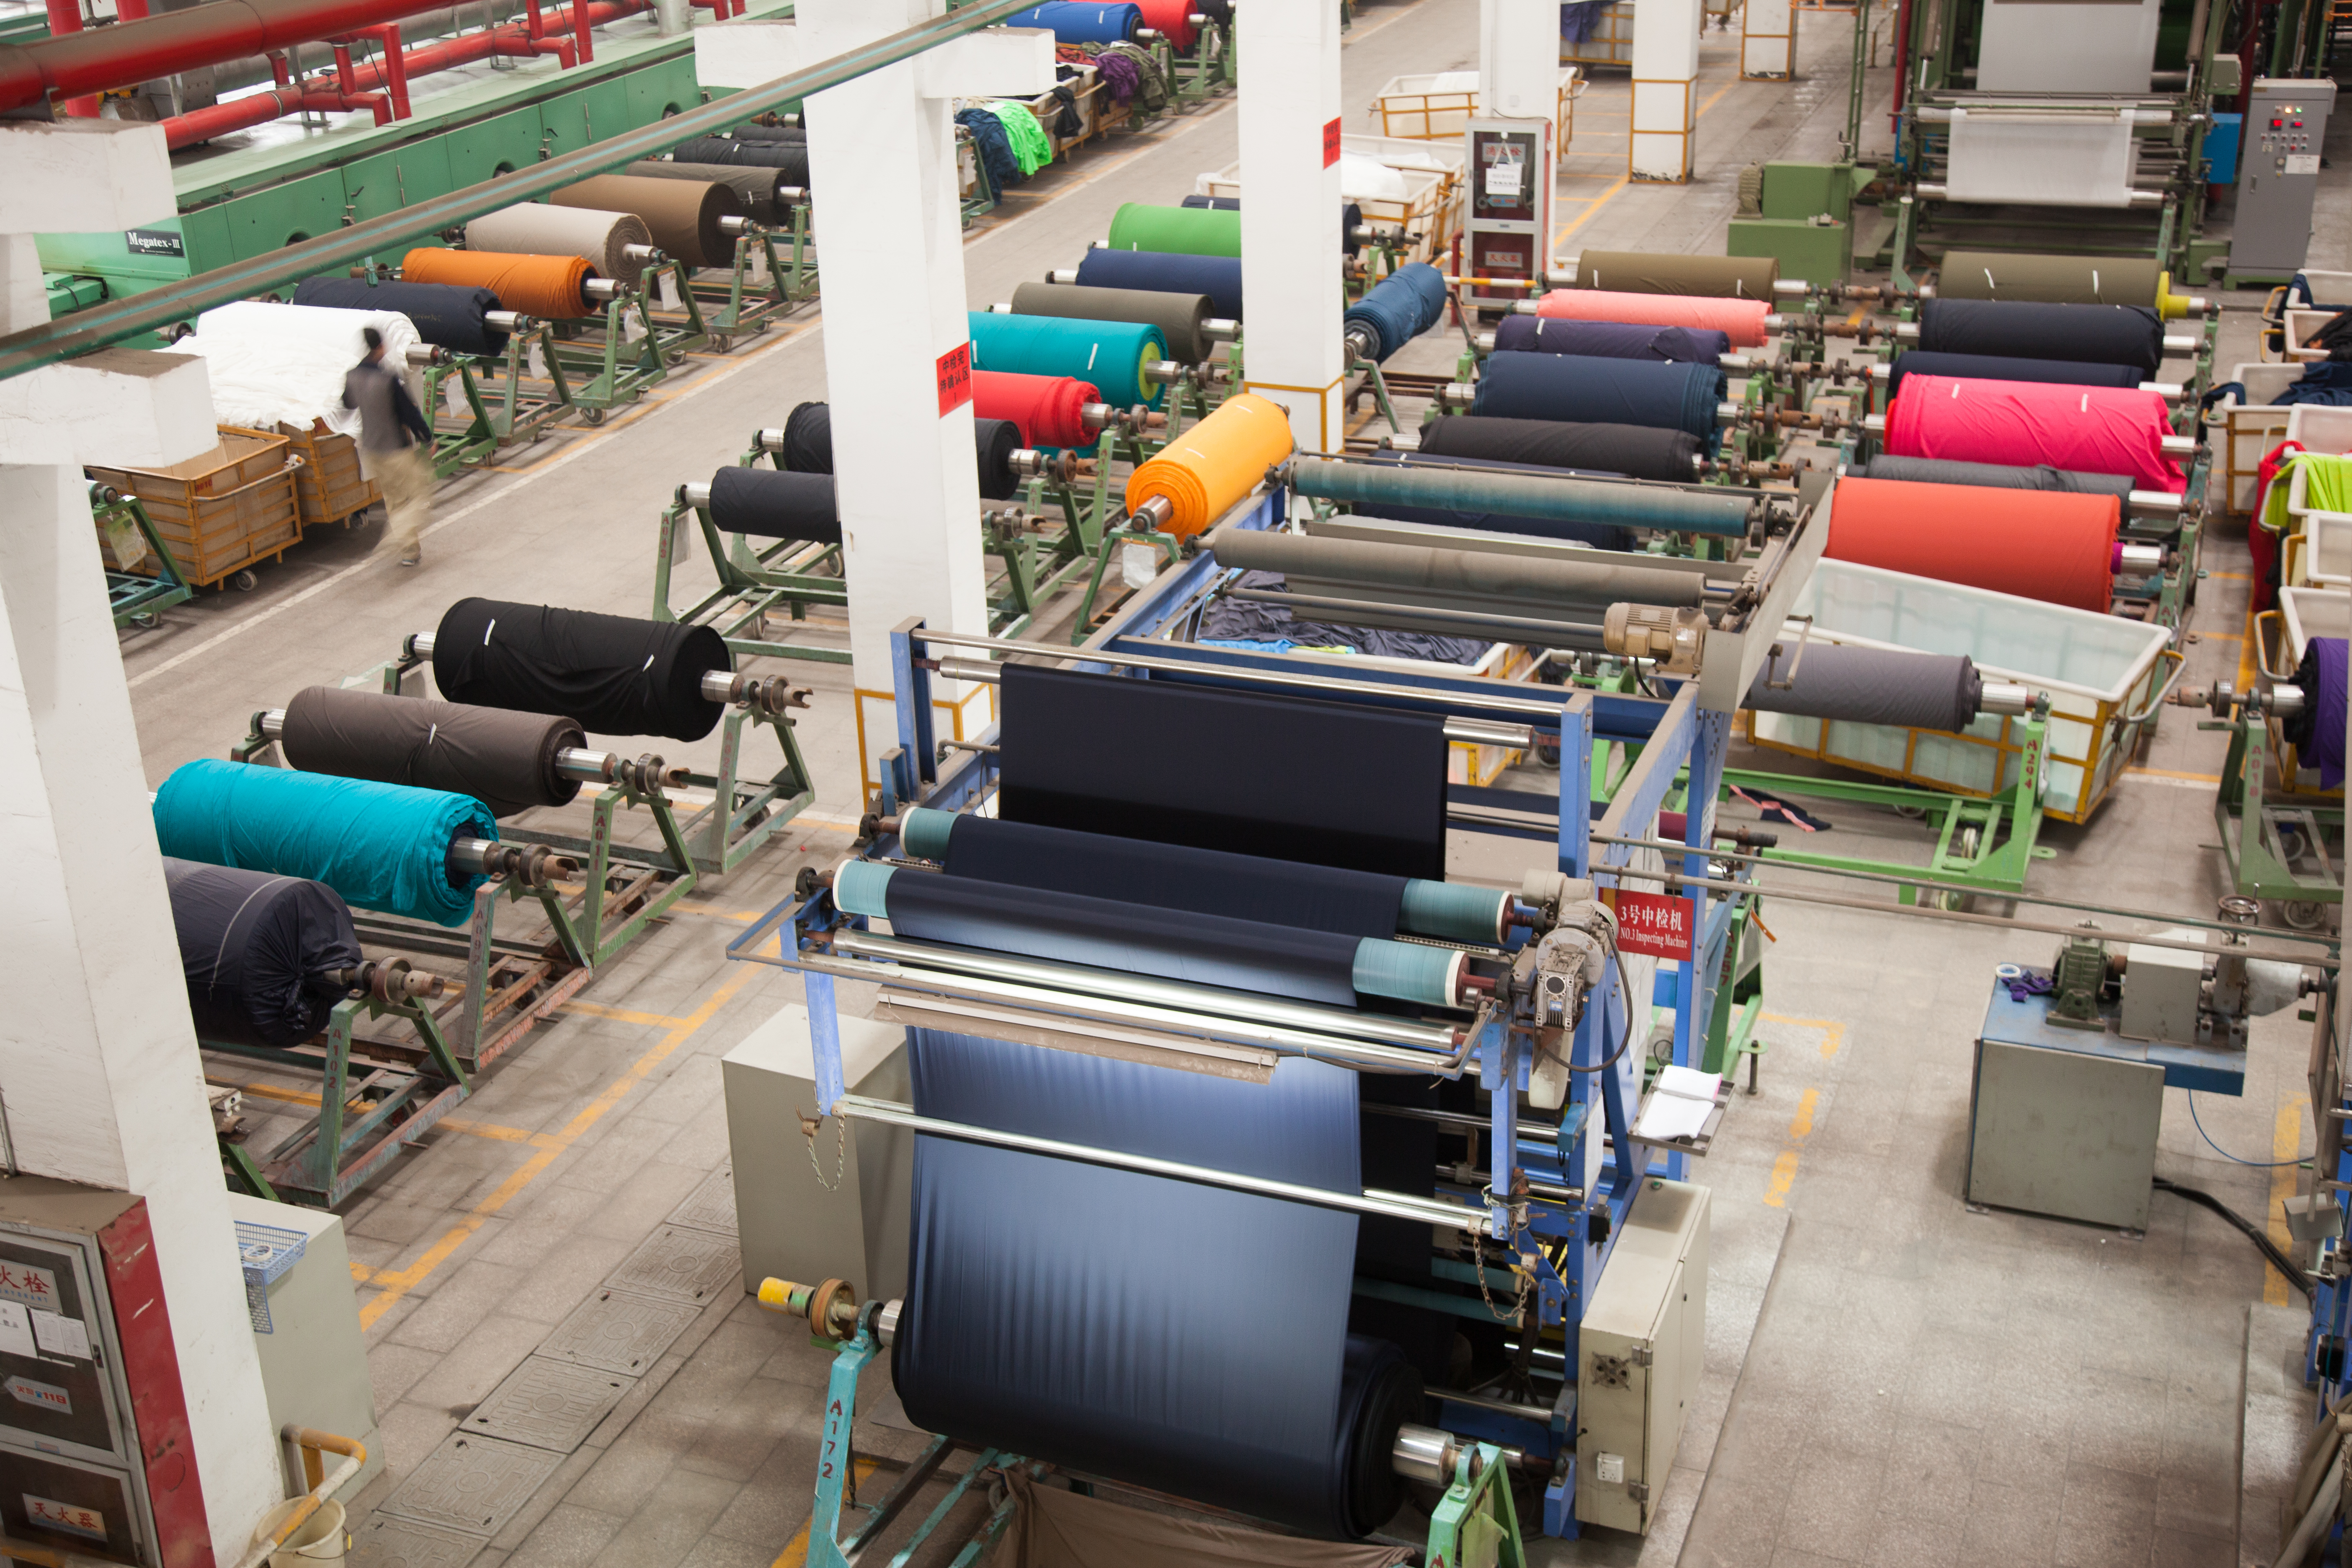 Korea Textile Industry Should Promote High Value-added Industrial ...